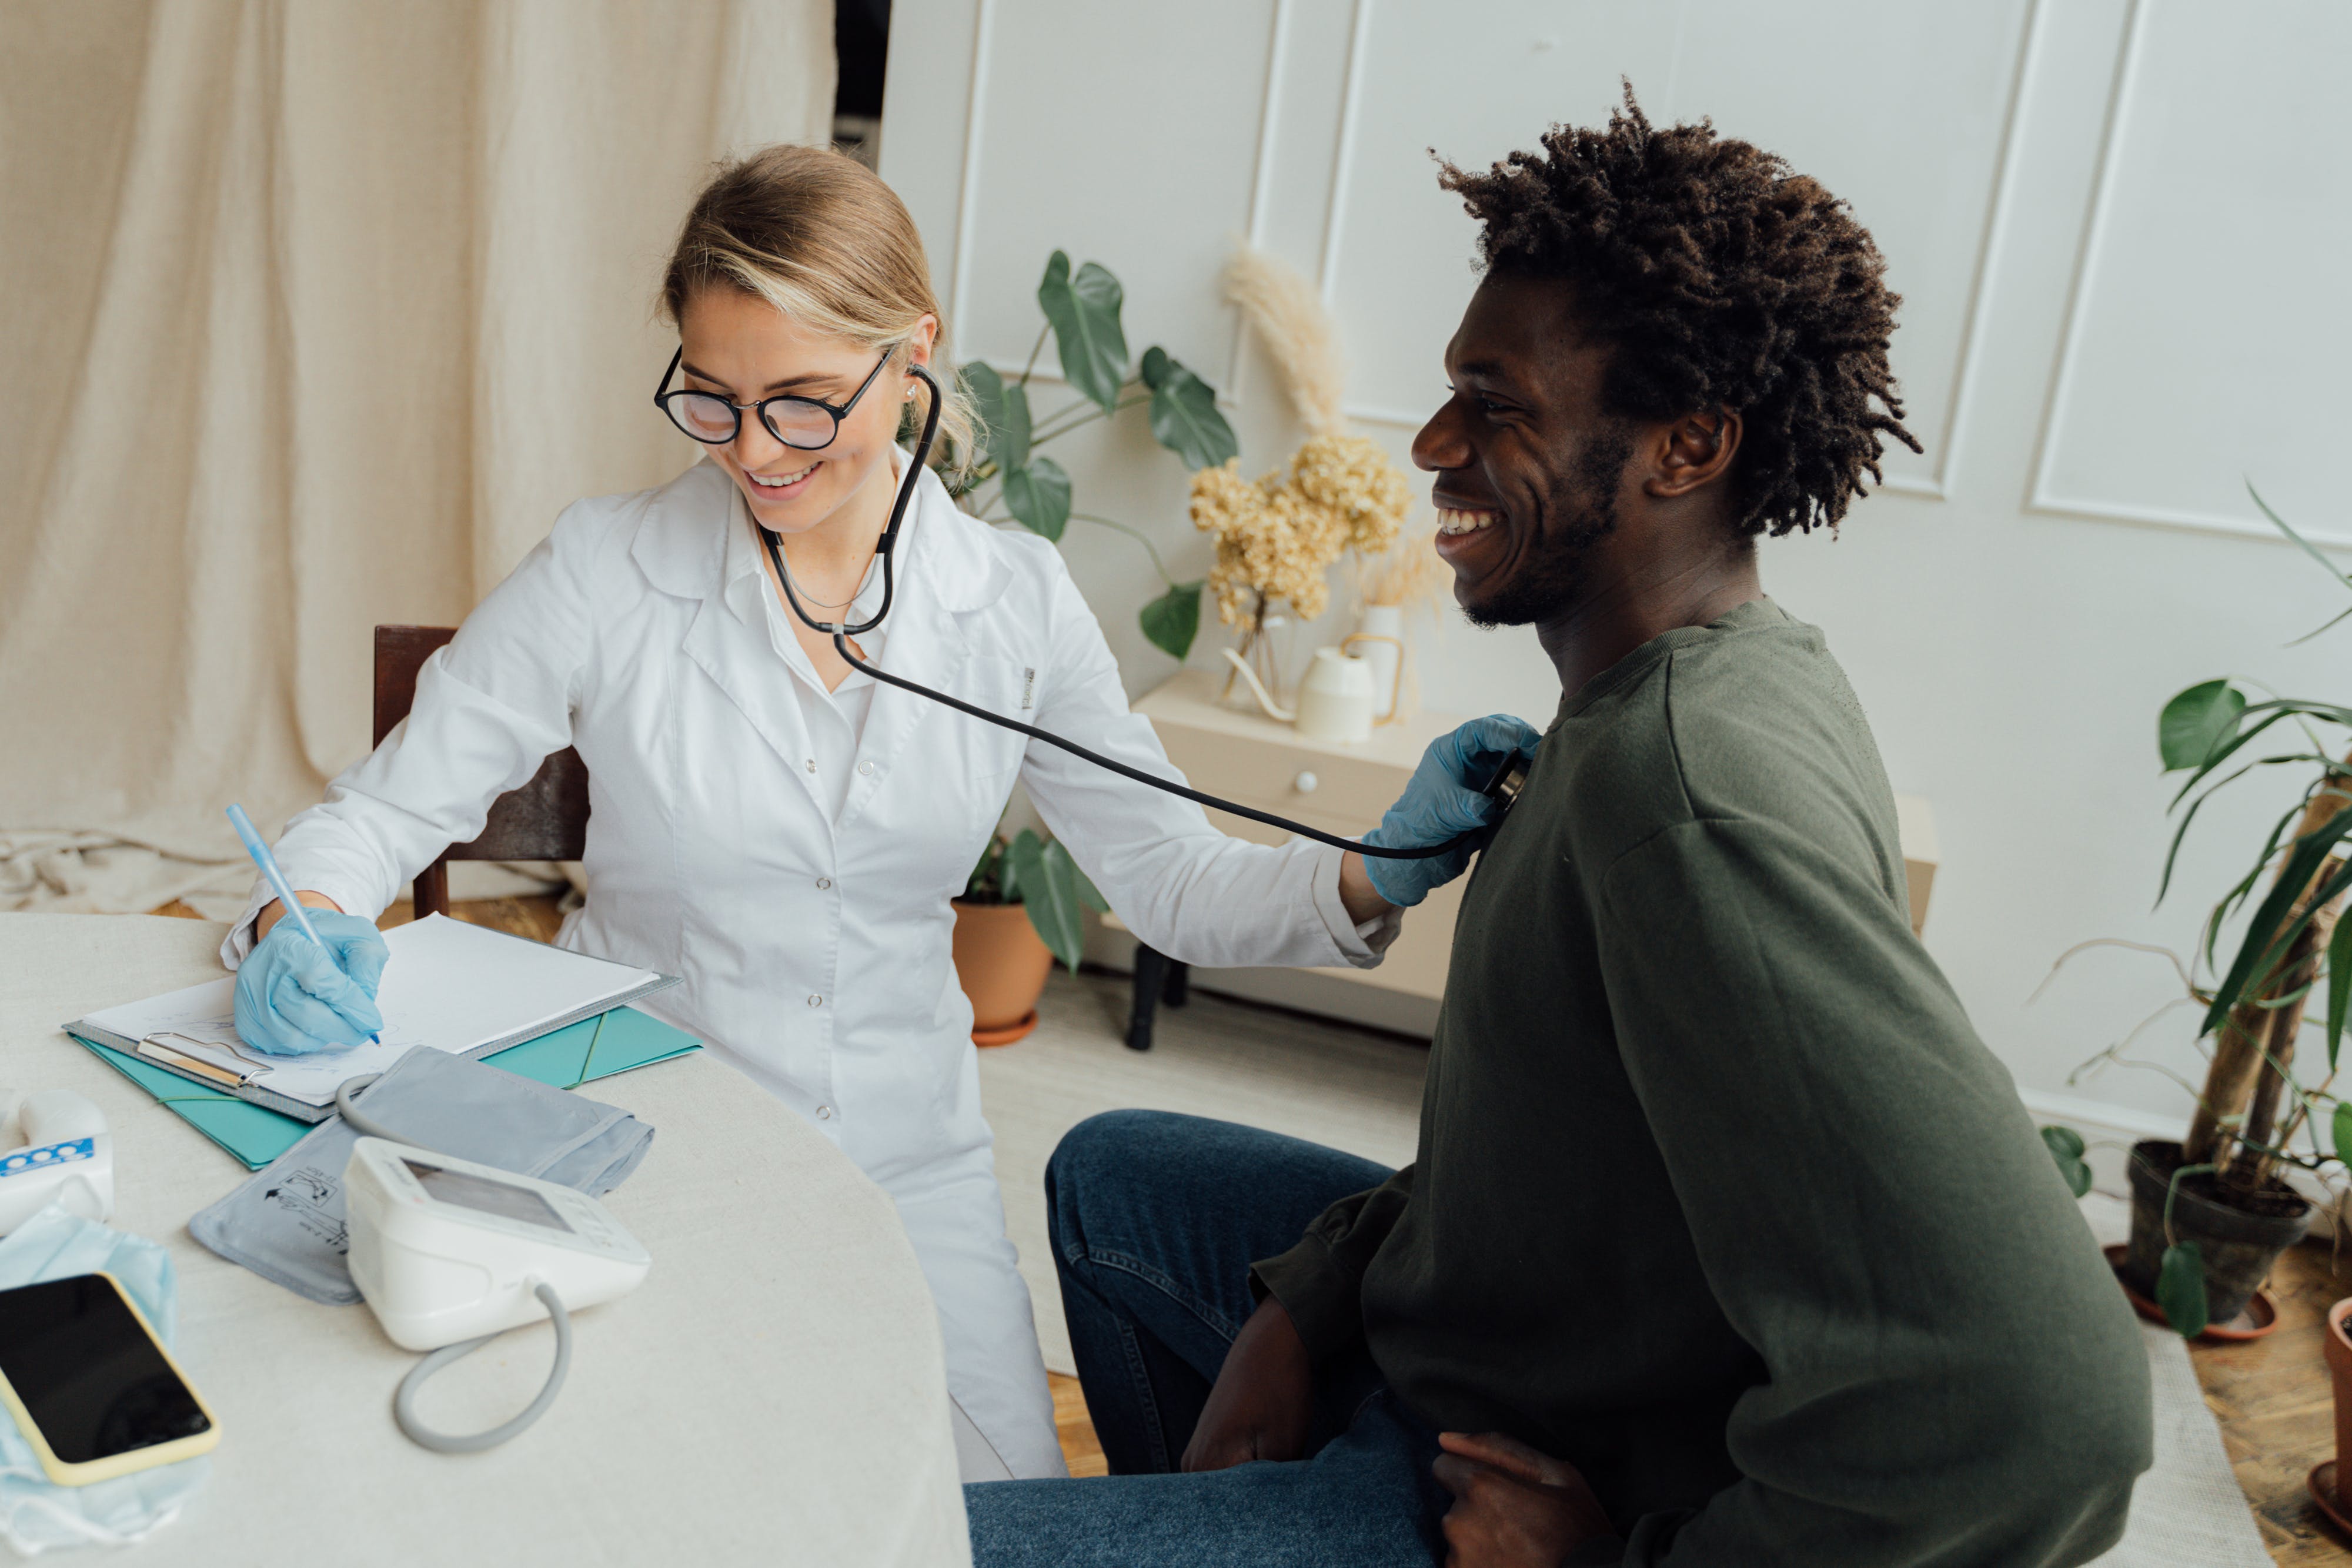 A doctor interacting with a patient. | Source: Pexels